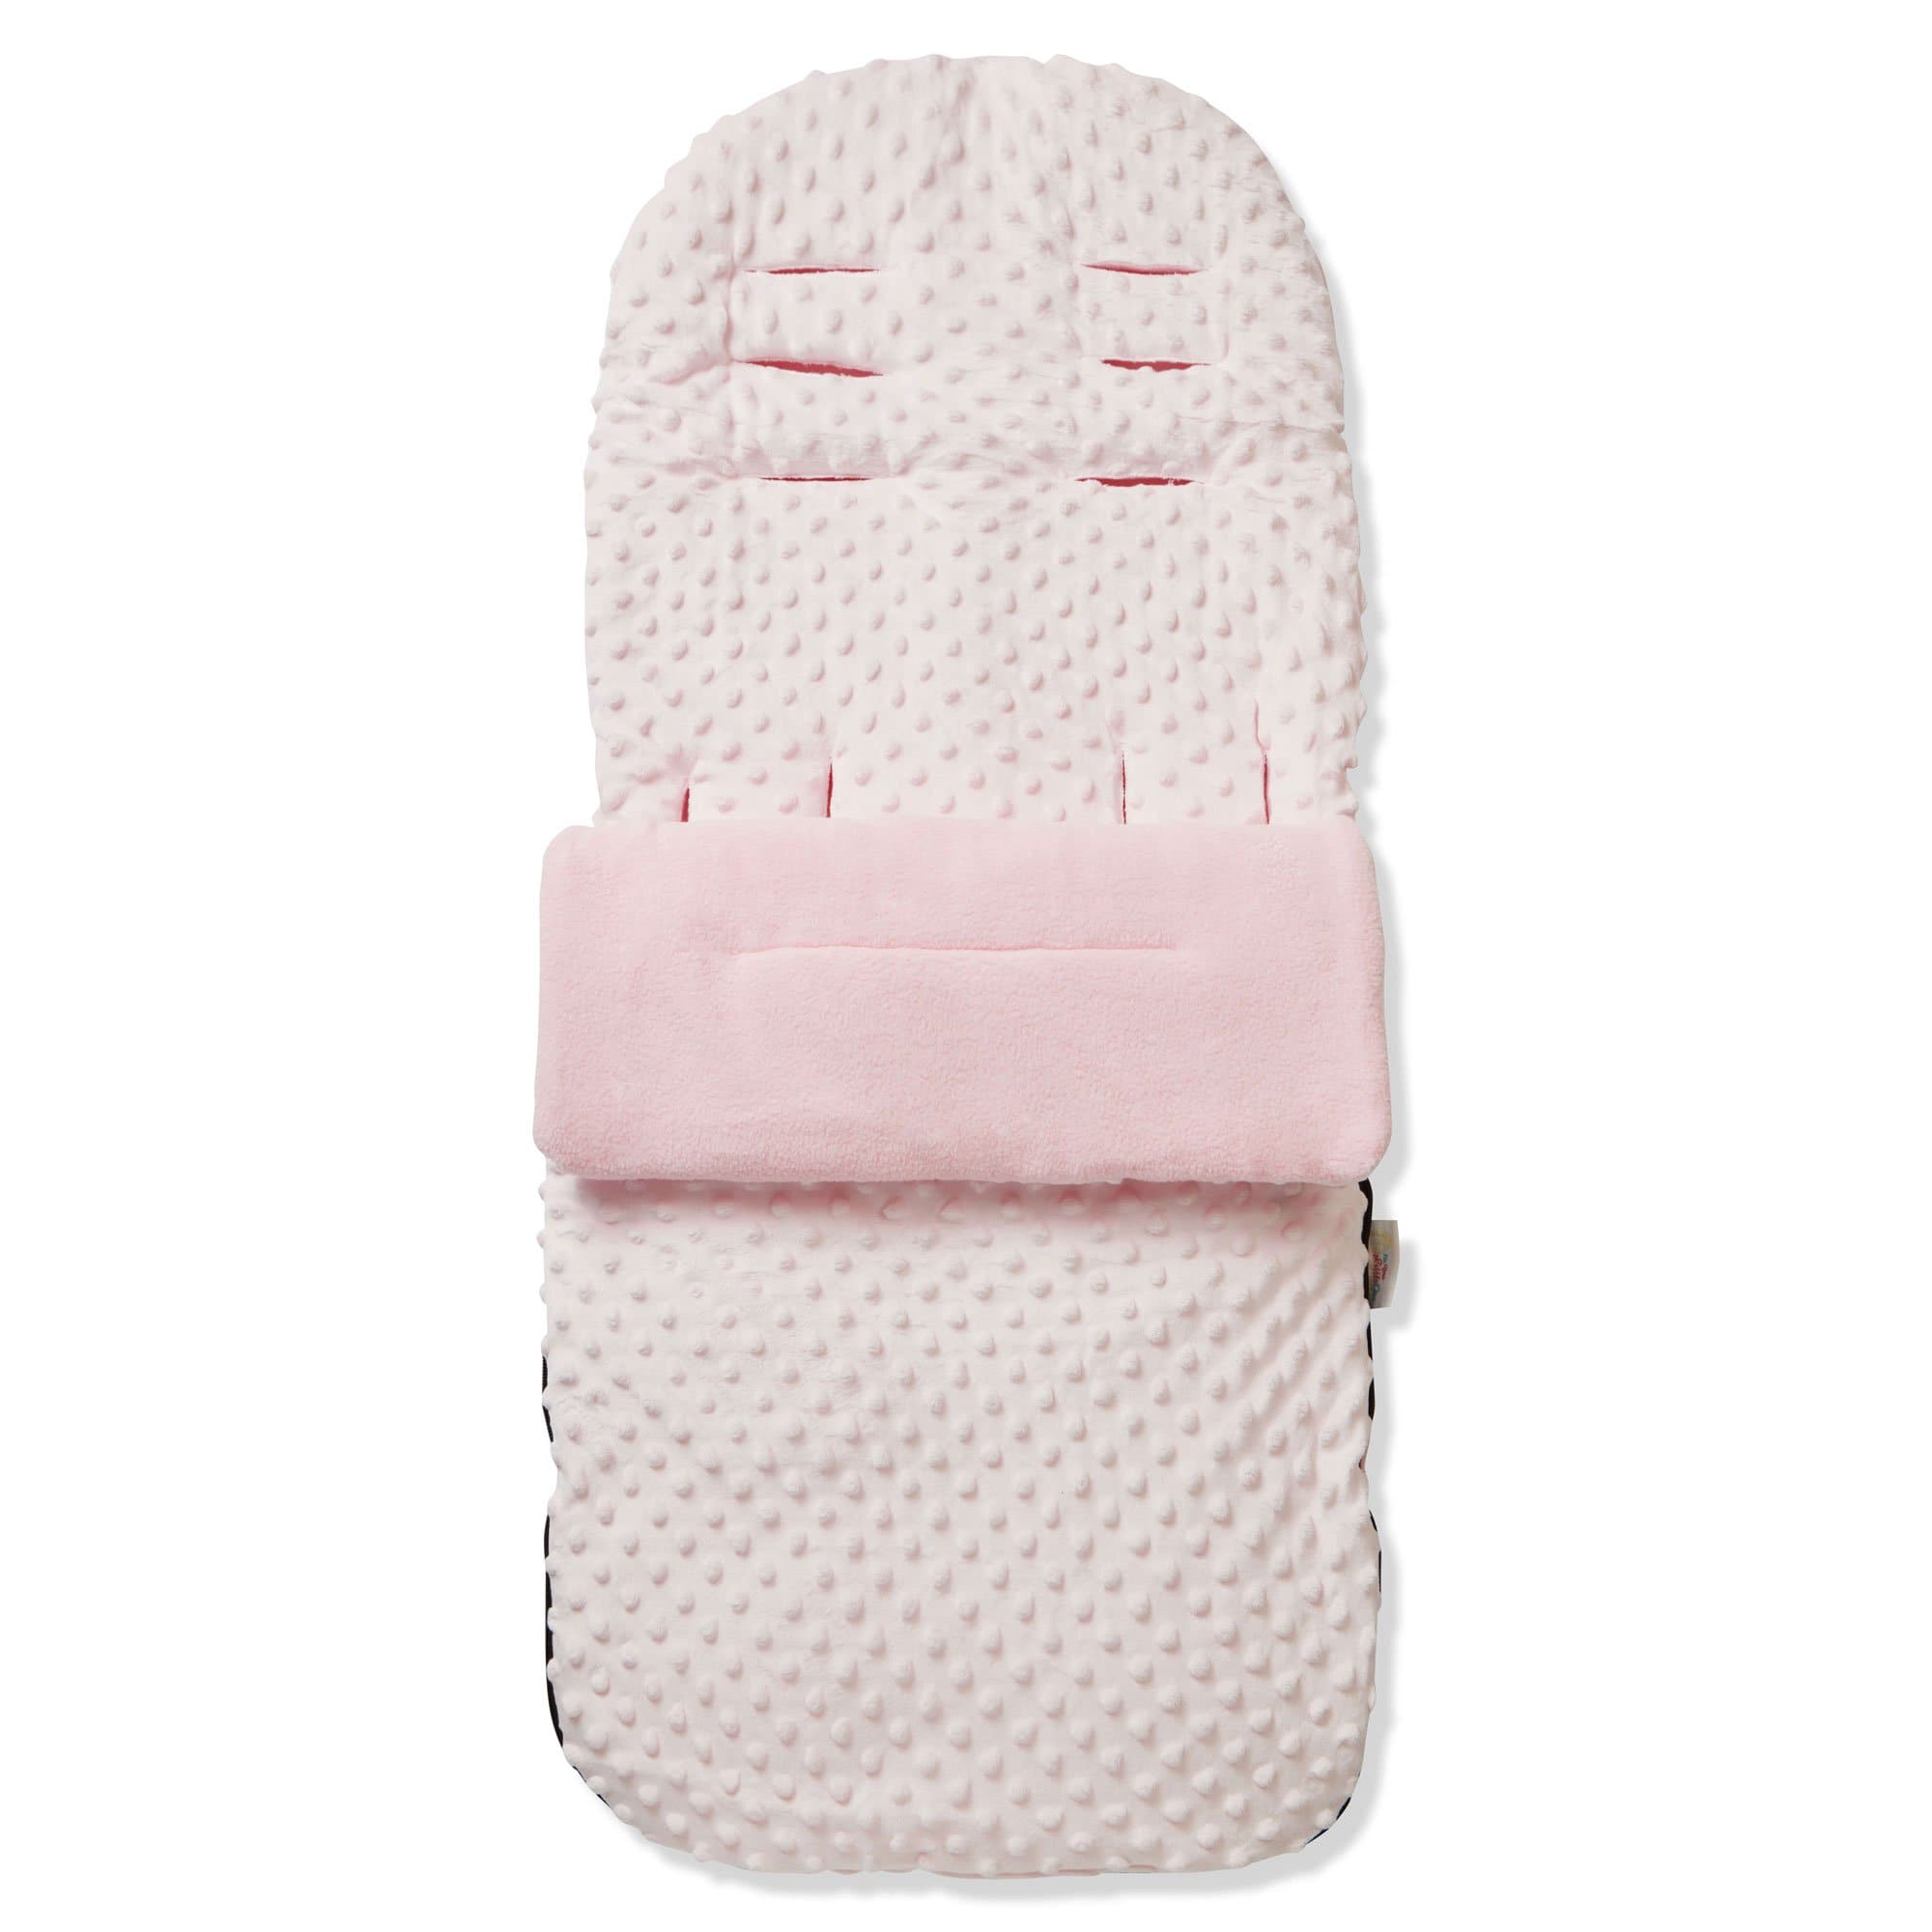 Dimple Footmuff / Cosy Toes Compatible with Venicci - Pink / Fits All Models | For Your Little One